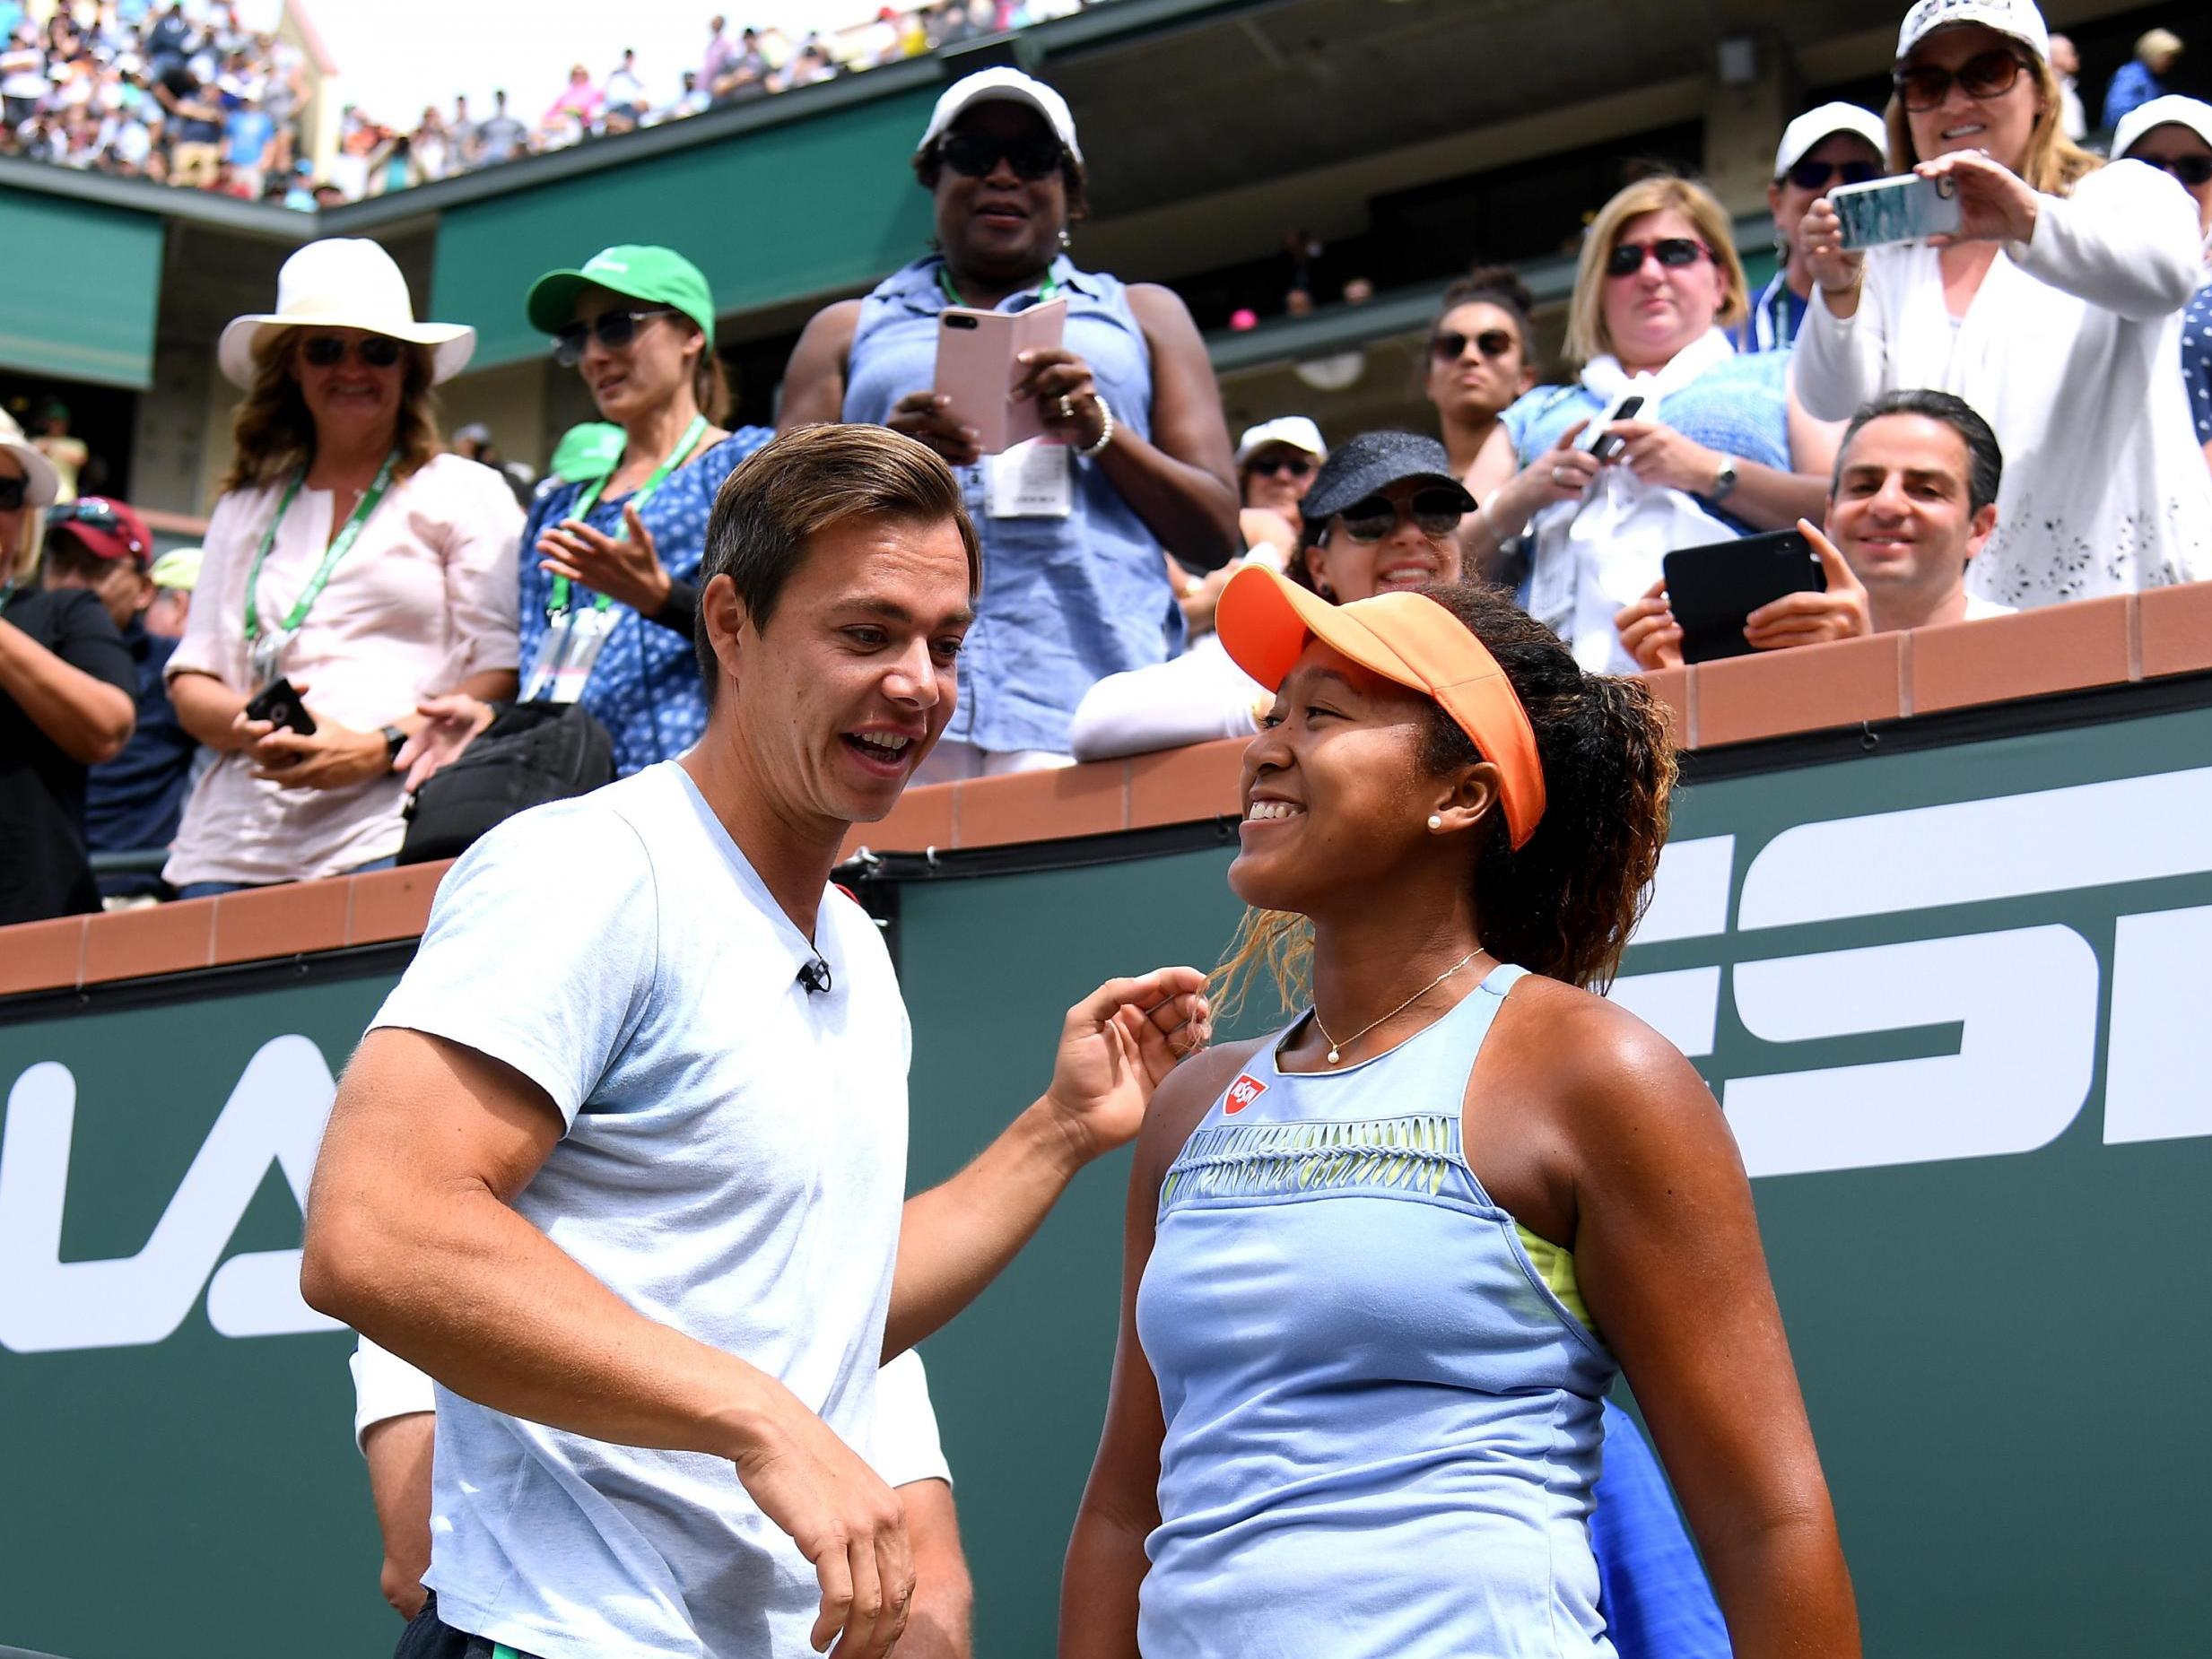 Naomi Osaka with Sascha Bajin after her victory at the BNP Paribas Open in March 2018